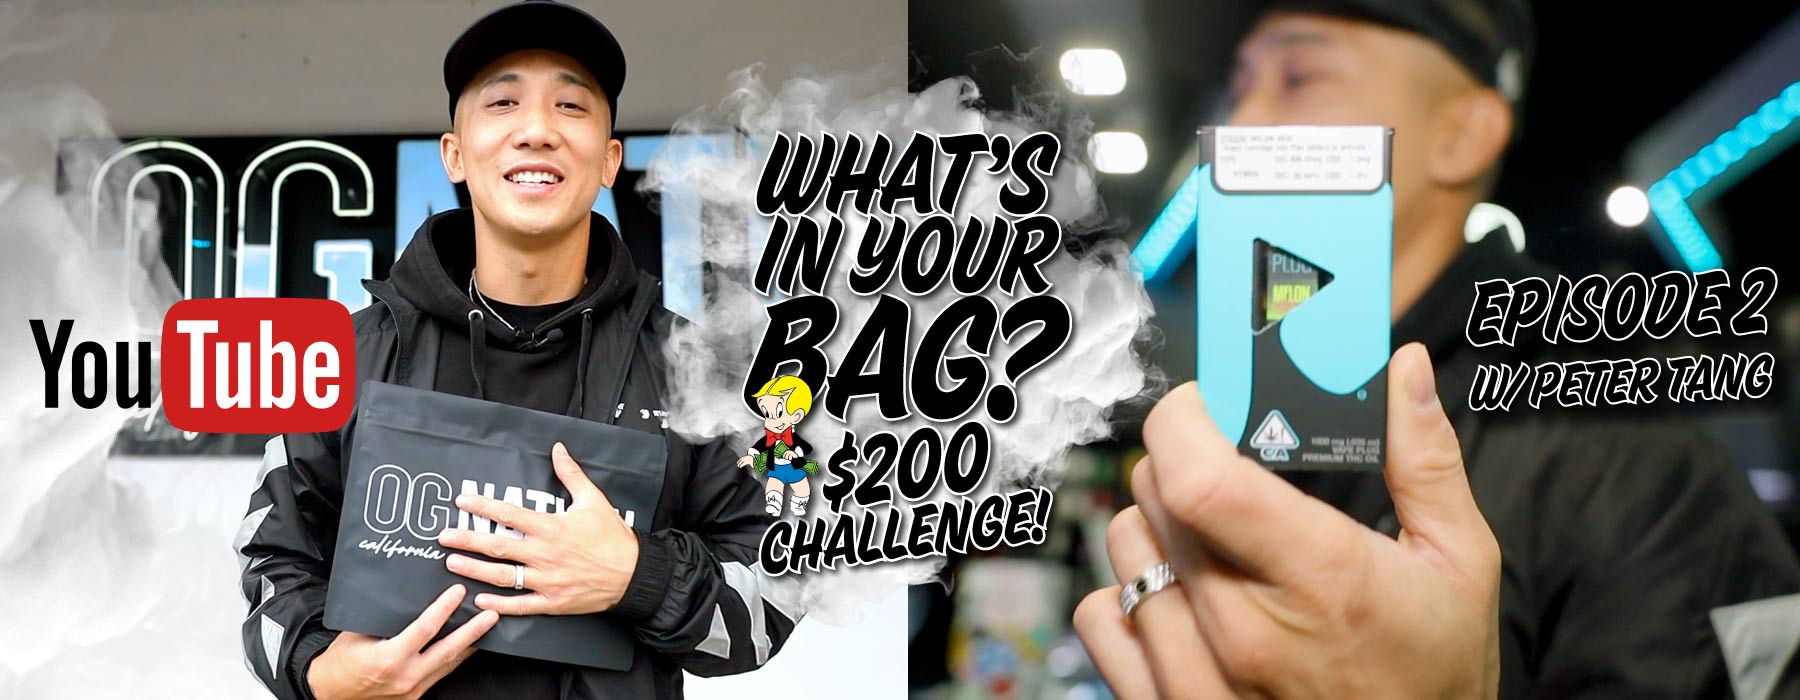 "WHAT'S IN YOUR BAG?" Episode 2 w/ Peter Tang From PlugPlay